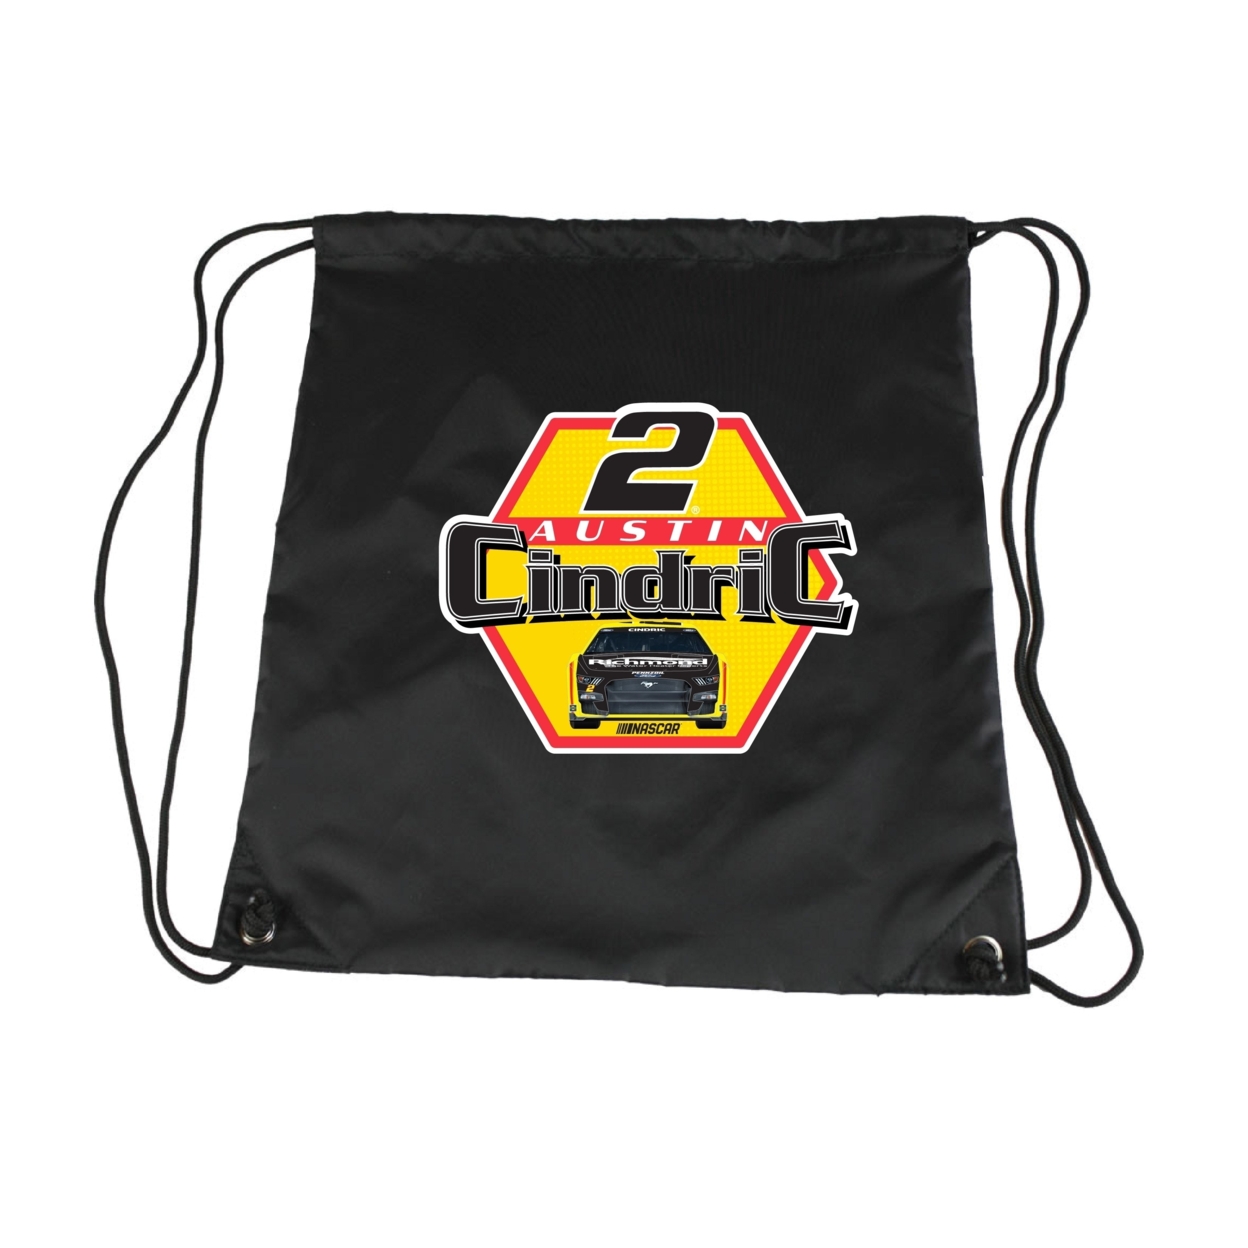 #2 Austin Cindric Officially Licensed Nascar Cinch Bag With Drawstring